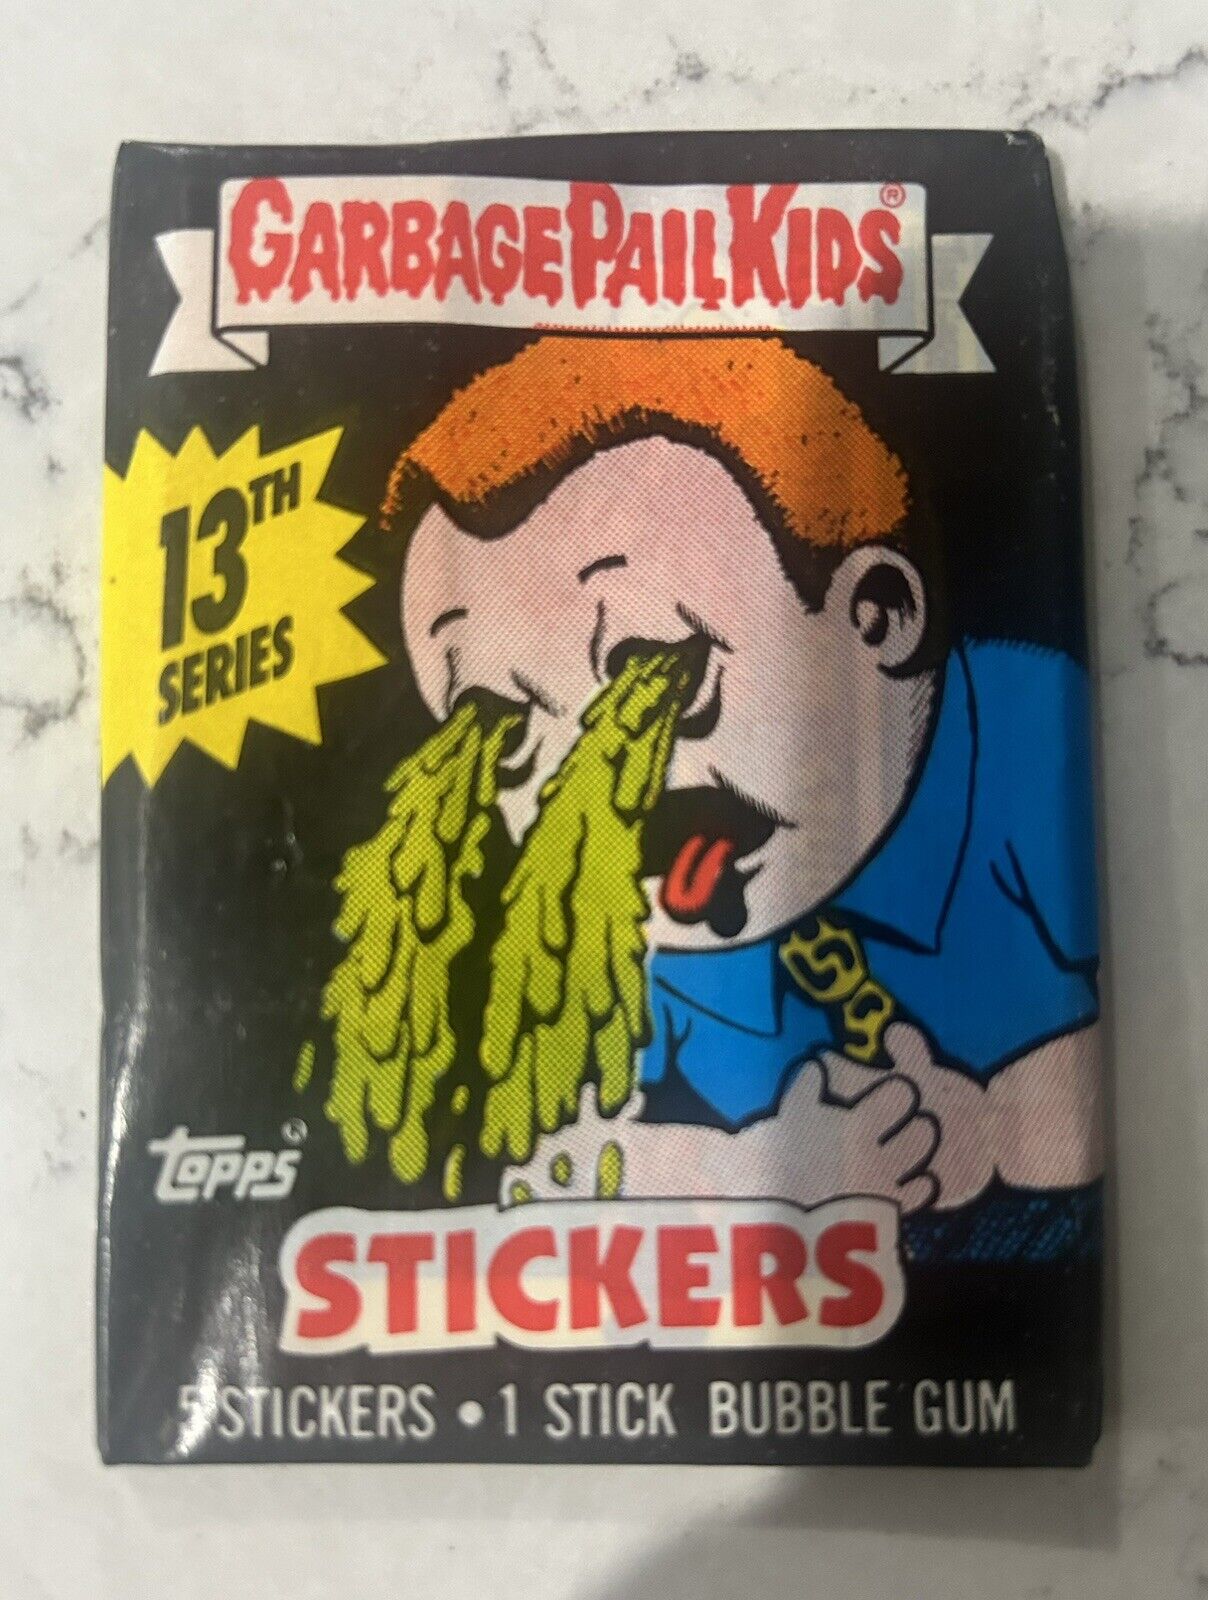 Garbage Pail Kids 13th Series Sealed Wax Pack OS13 from Authenicated BBCE Box